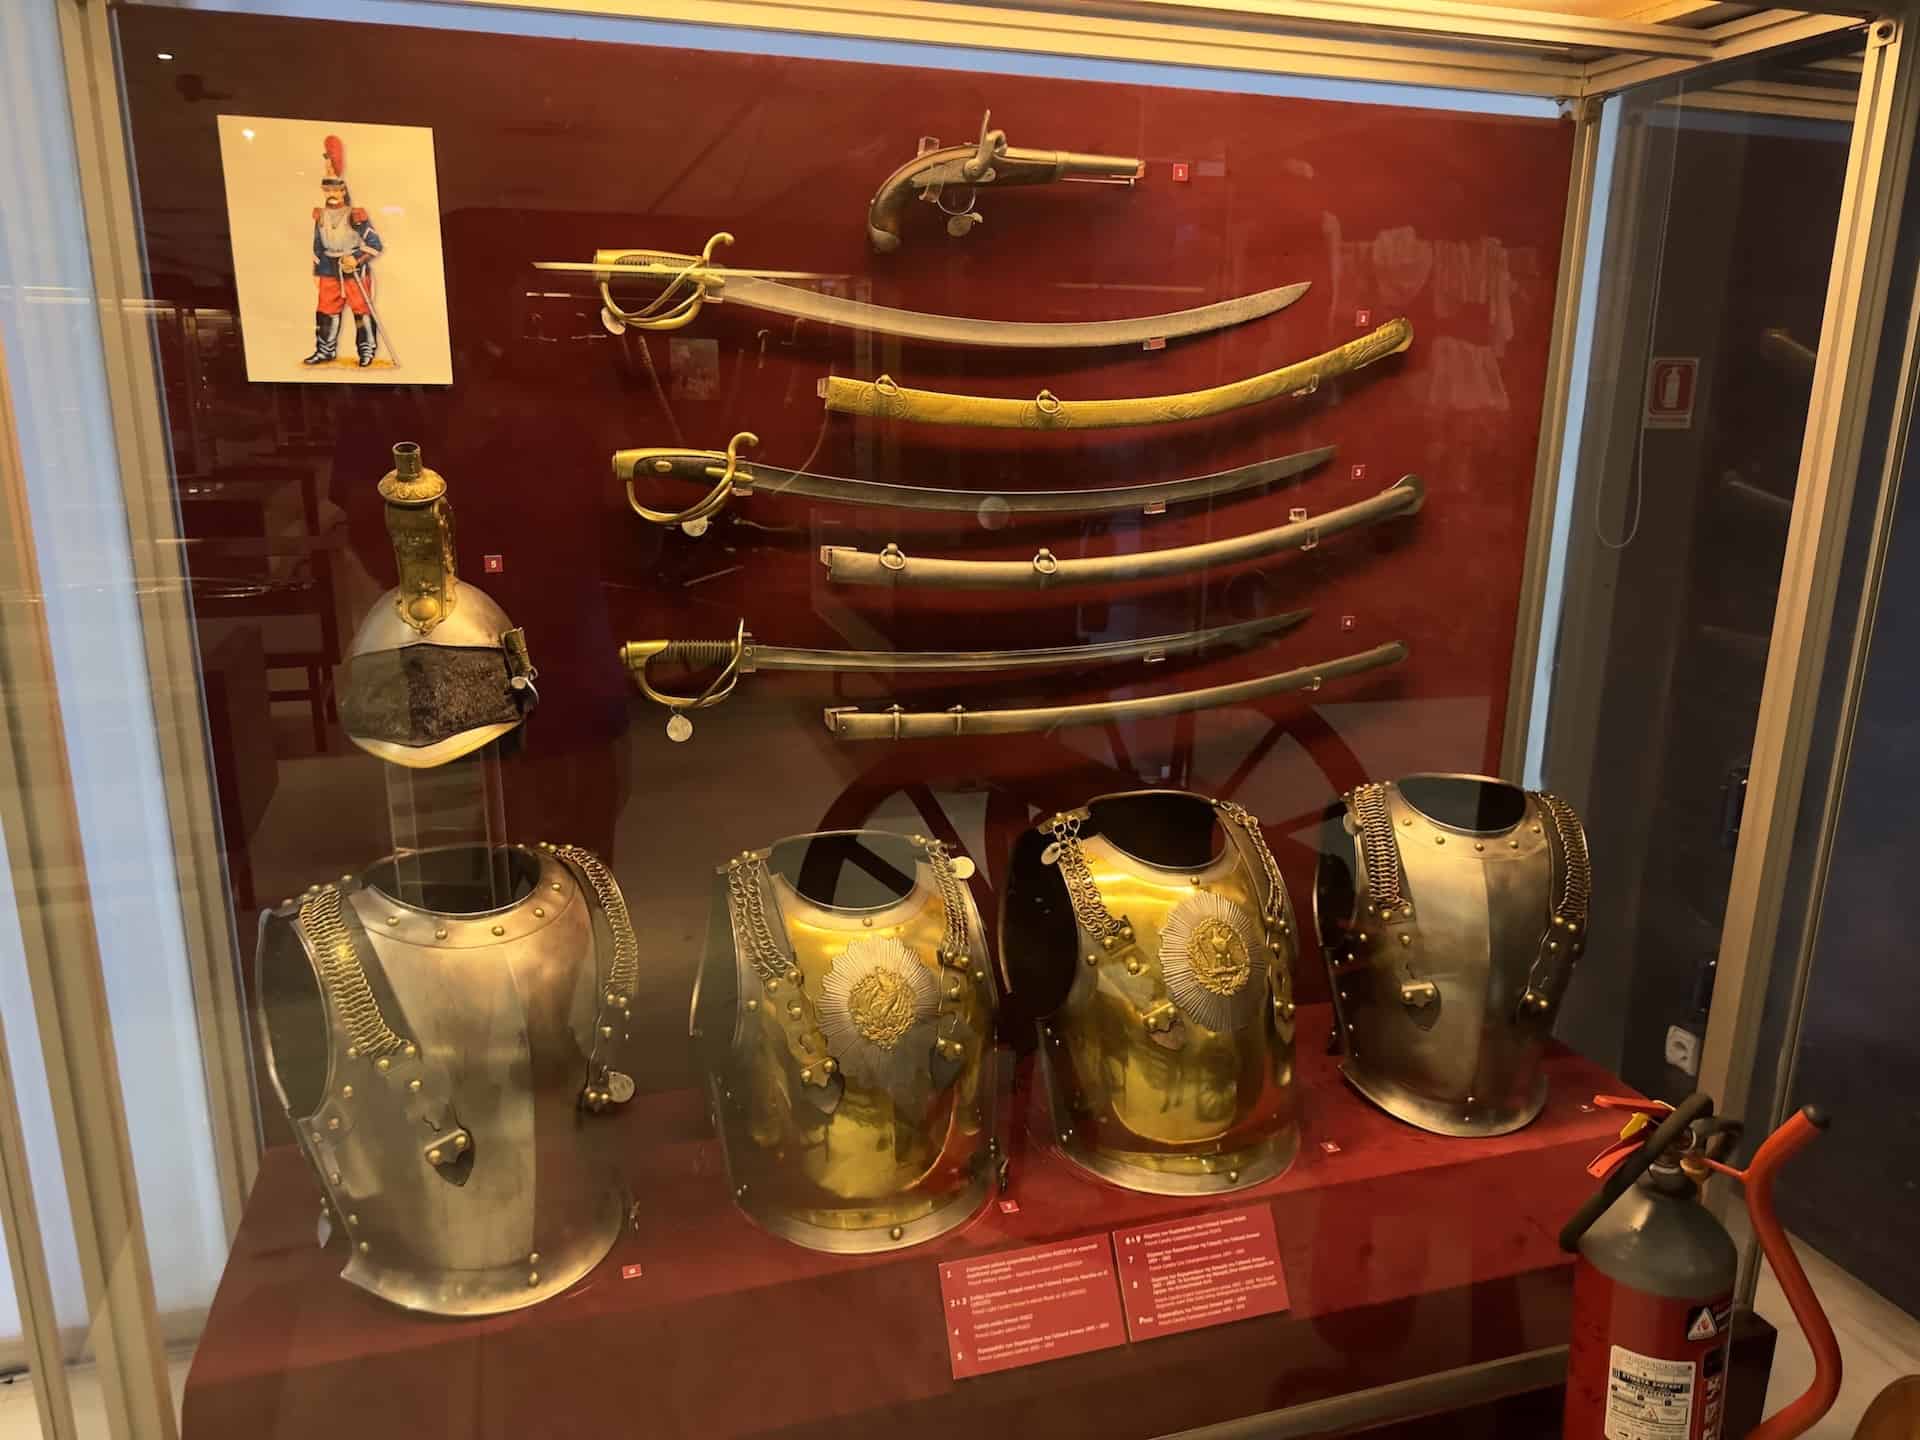 French sabers, helmet, and armor, 19th century in the weapons gallery at the War Museum in Athens, Greece